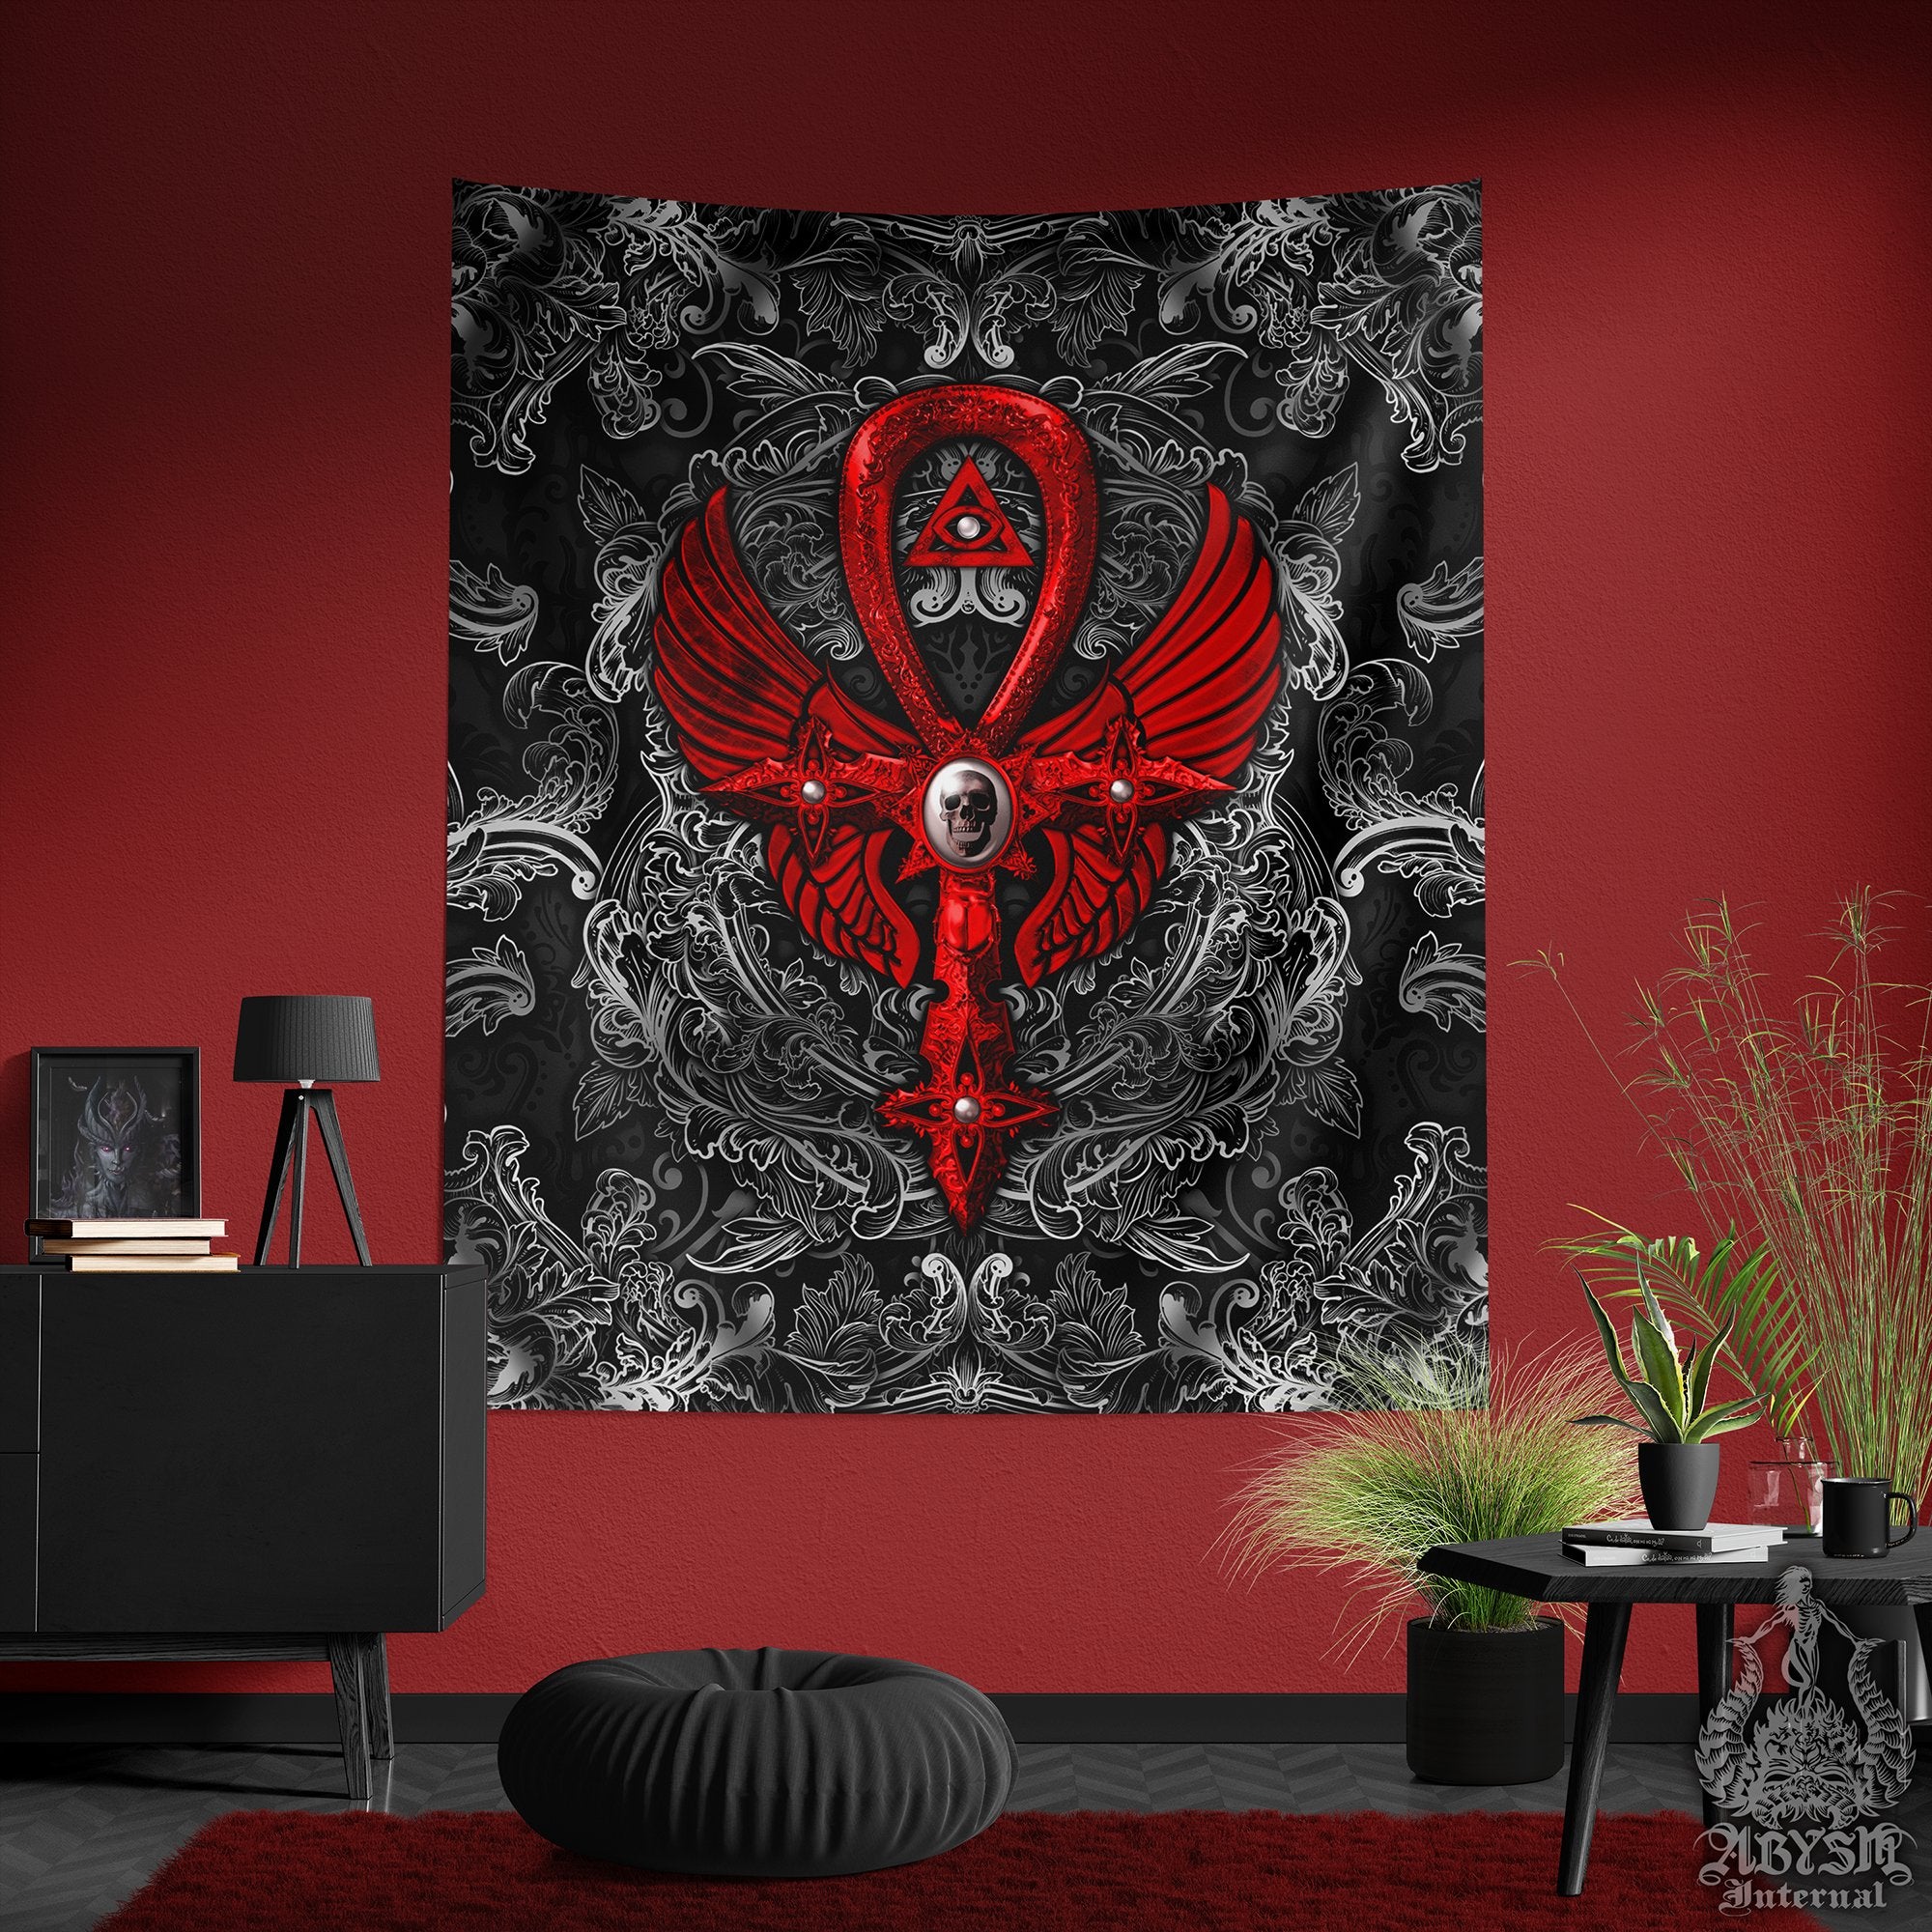 Gothic Ankh Tapestry, Goth Cross Wall Hanging, Occult Home Decor, Vertical Art Print - Dark Black, White, Gold, Red, 3 Colors - Abysm Internal